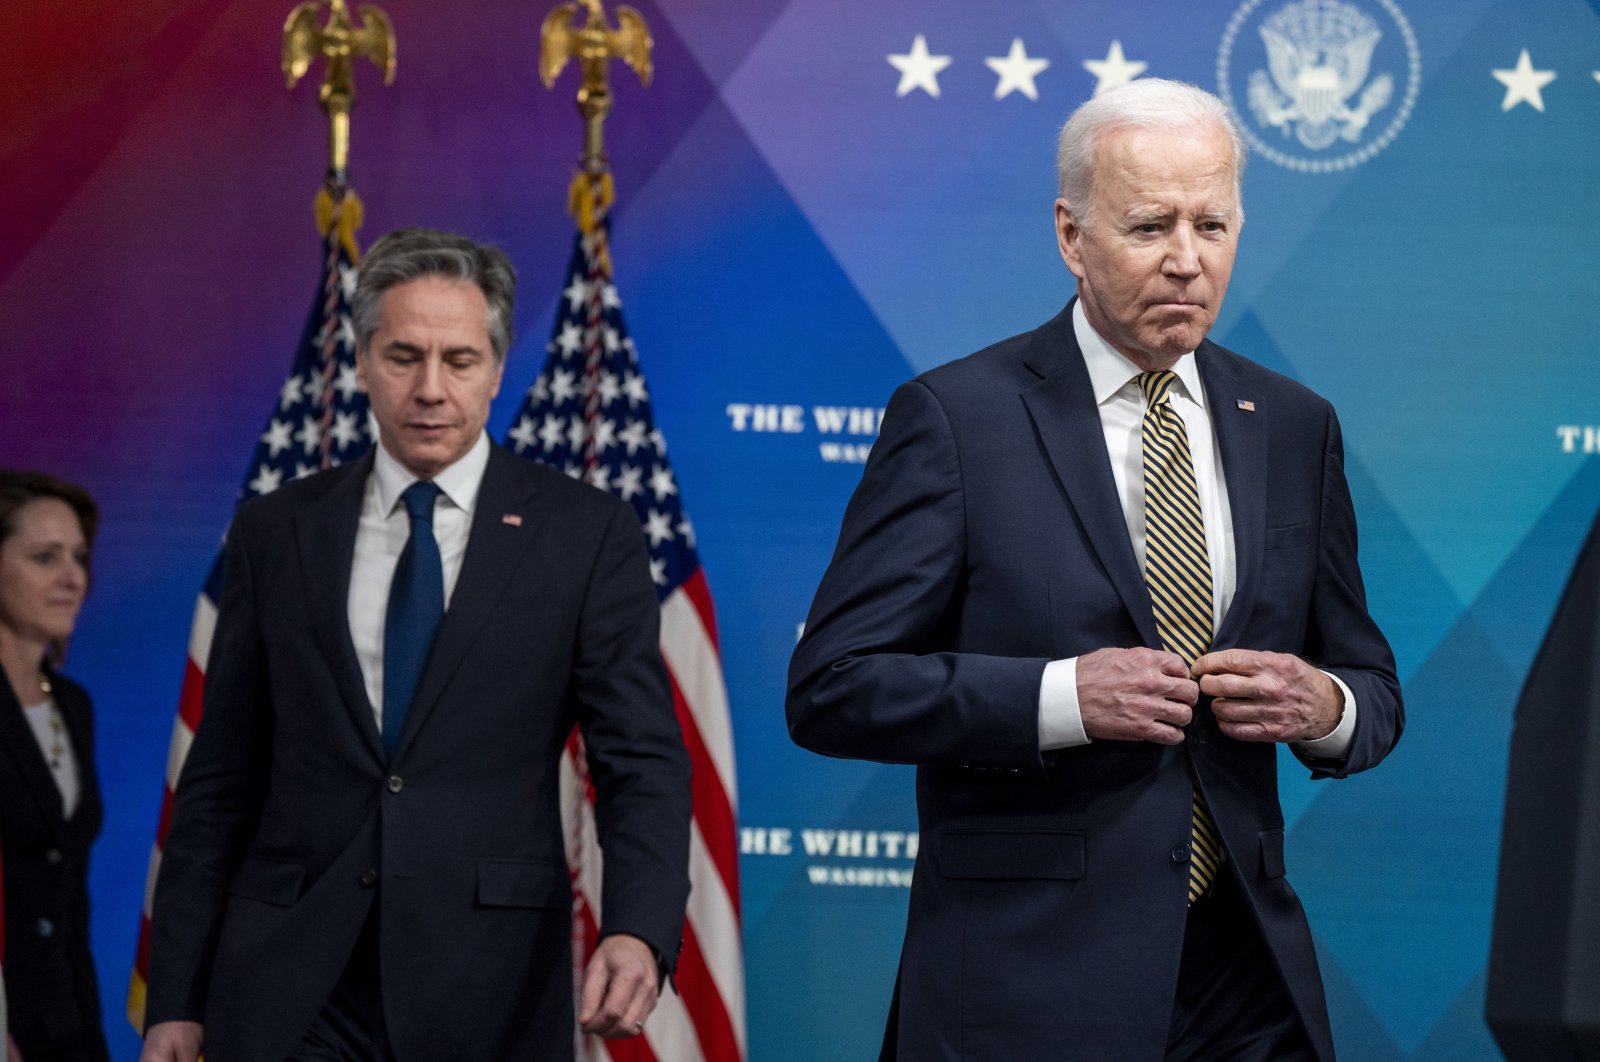 U.S. President Joe Biden (R) arrives with Secretary of State Antony Blinken to sign a delegation authority for $ 800 million of military assistance to Ukraine during a ceremony in the South Court Auditorium of the White House in Washington, D.C., U.S., March 16, 2022. (EPA Photo)